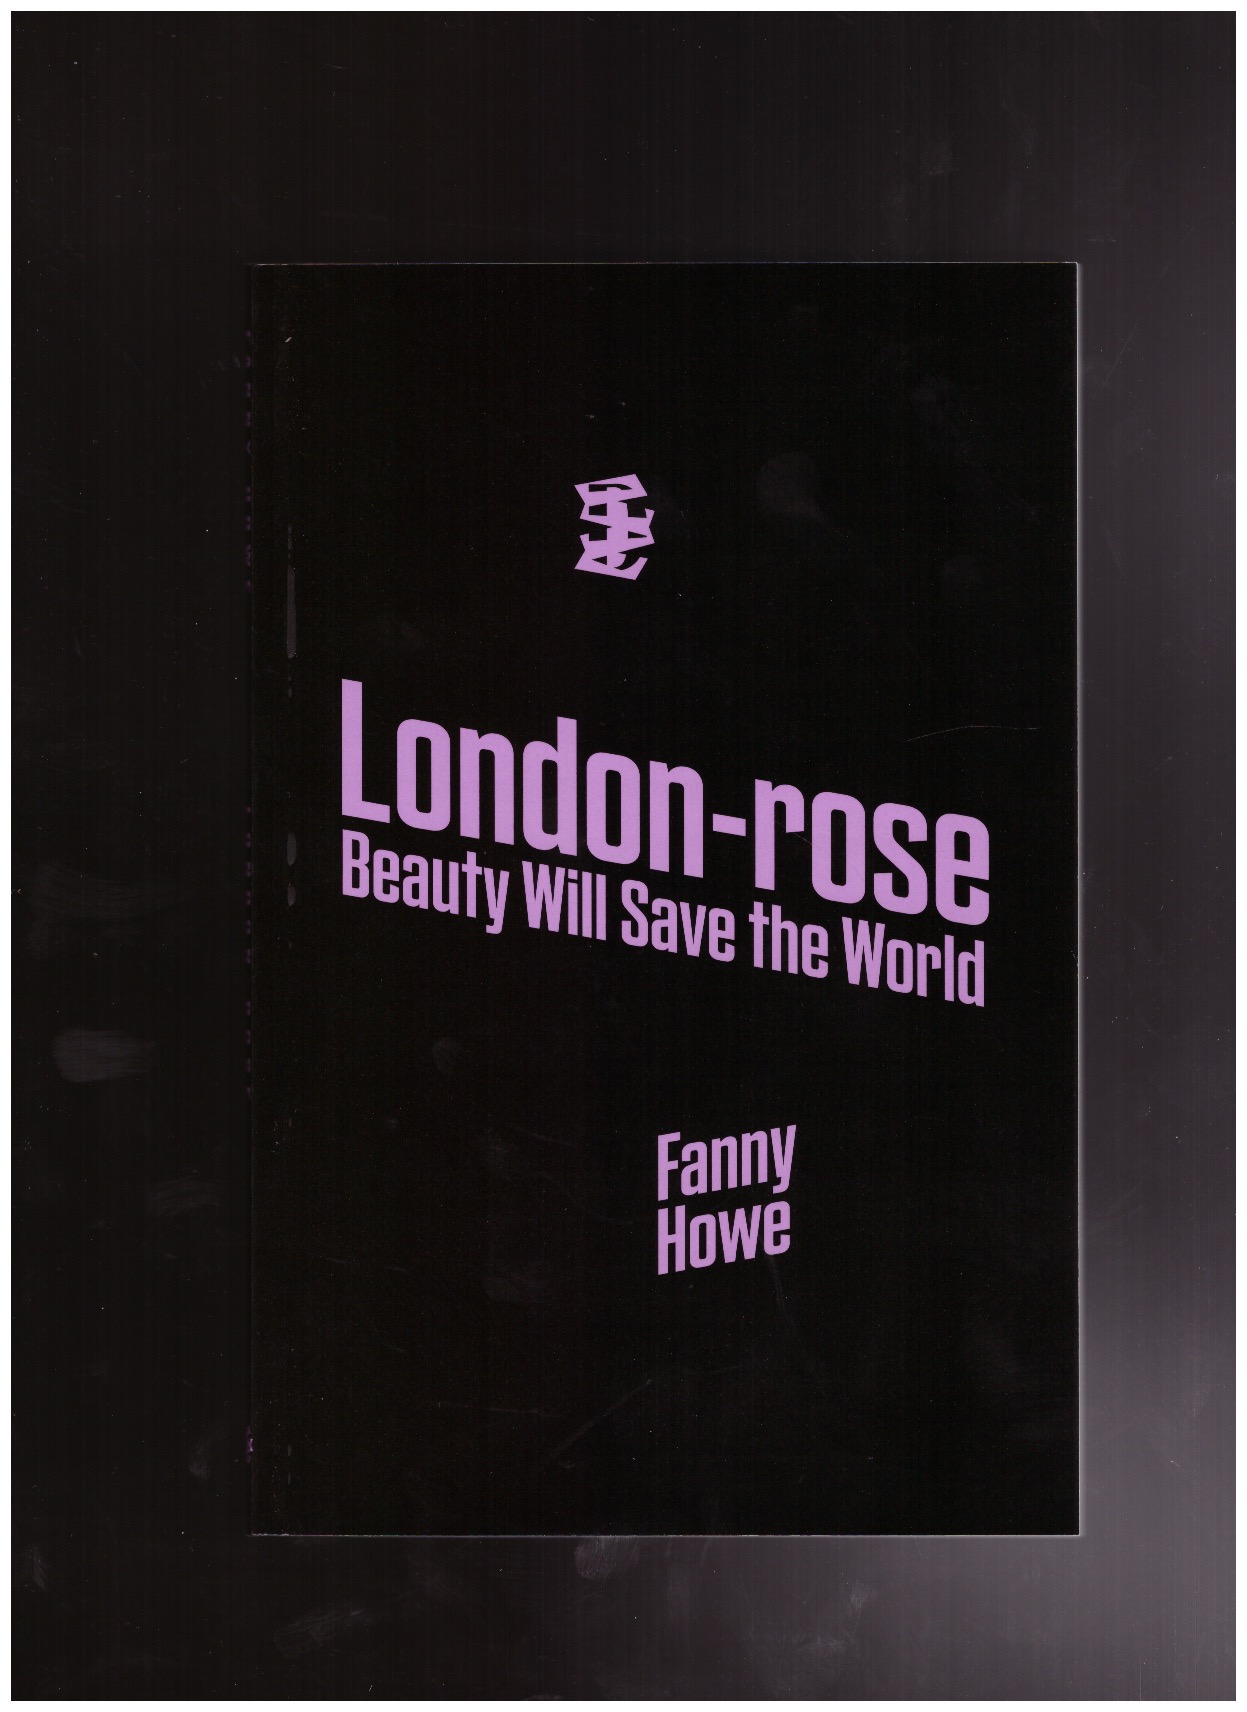 HOWE, Fanny - London-rose. Beauty Will Save the World